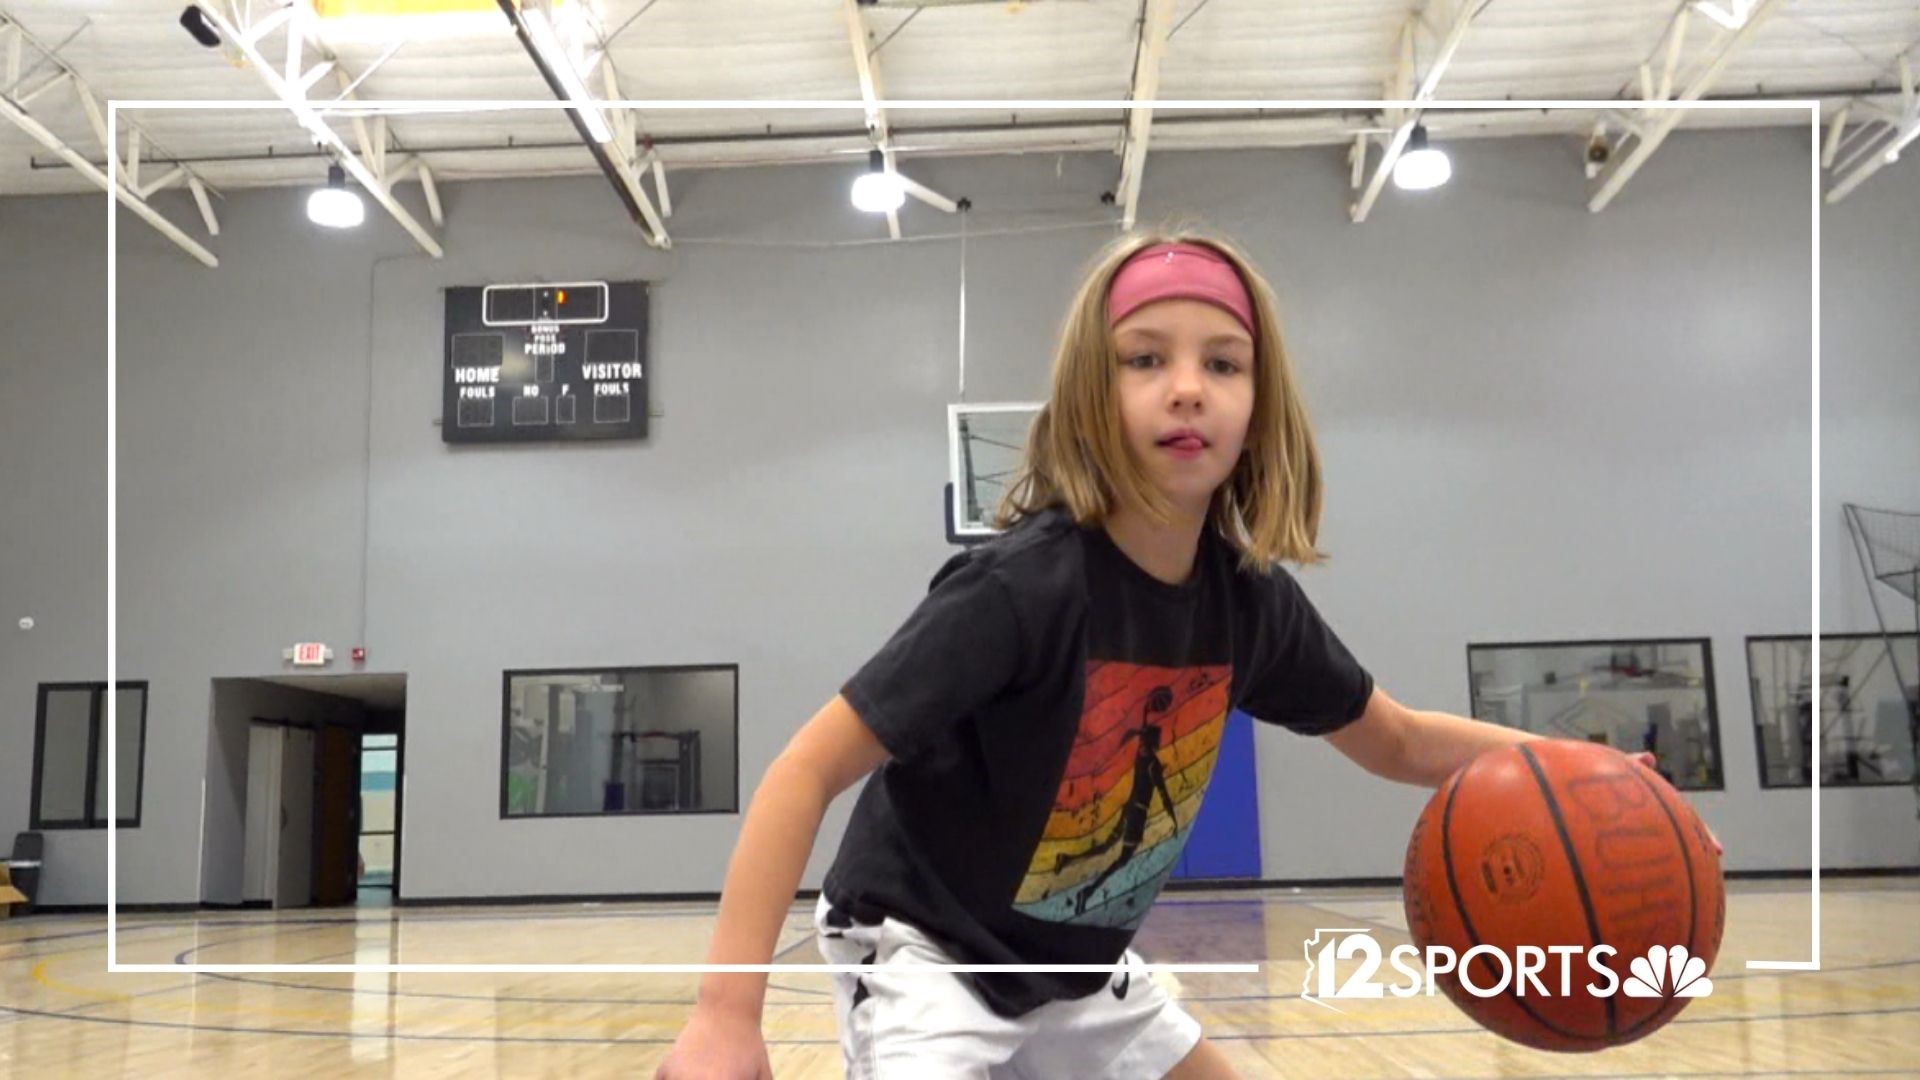 This third grader is shaping up to be the Valley's next basketball superstar.